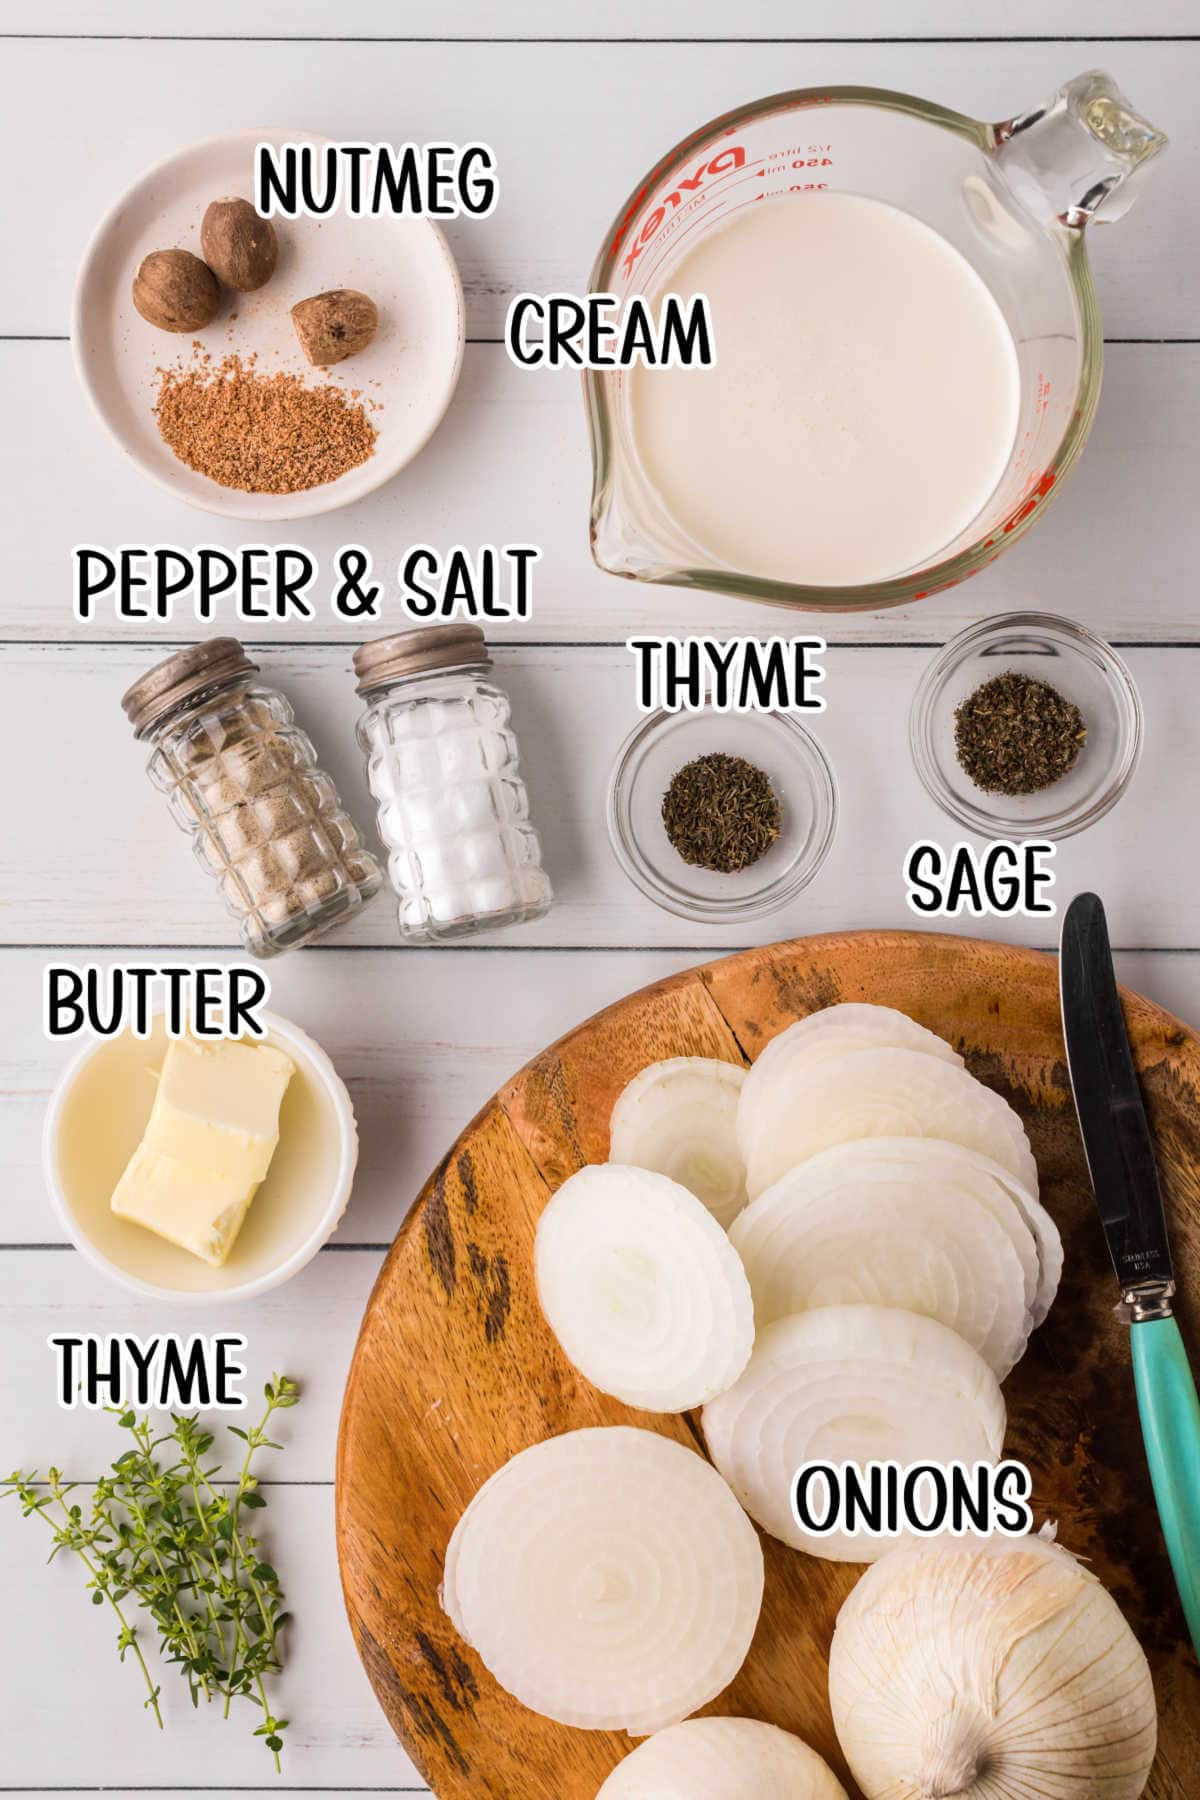 Labeled ingredients for creamed onion recipe.